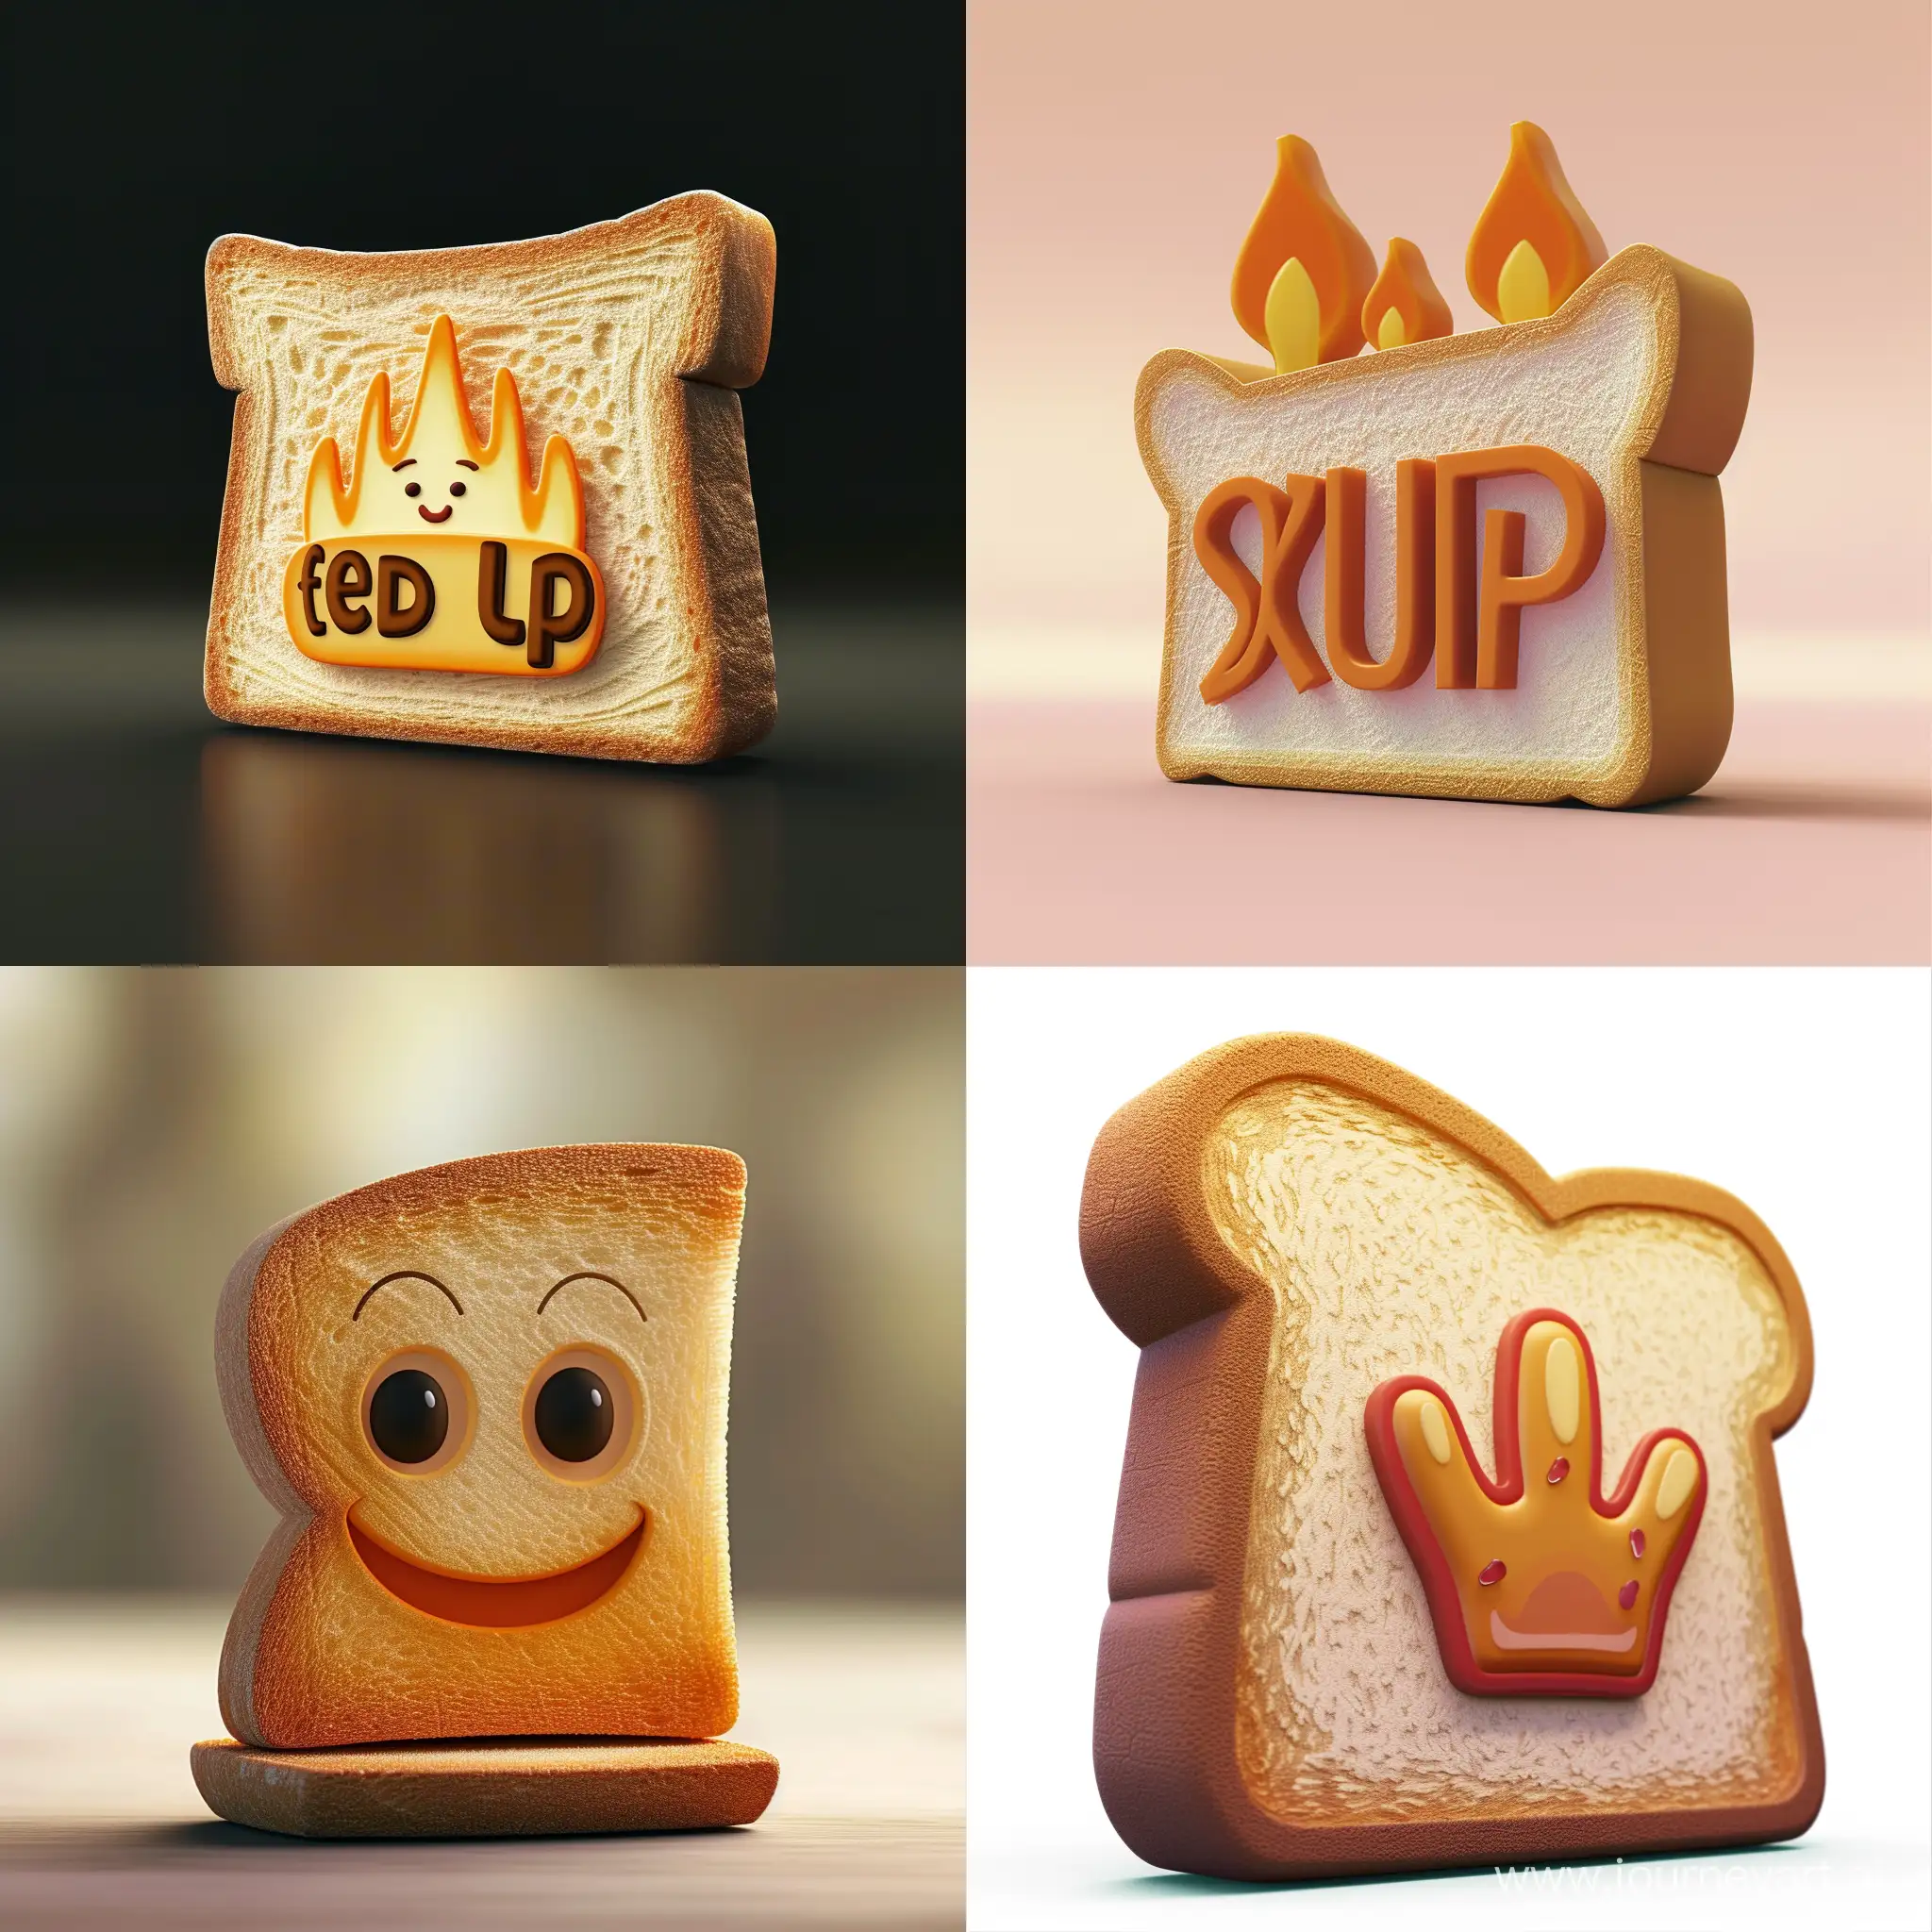 Genrate me 3d cartoon style logo on it Toast Side Up